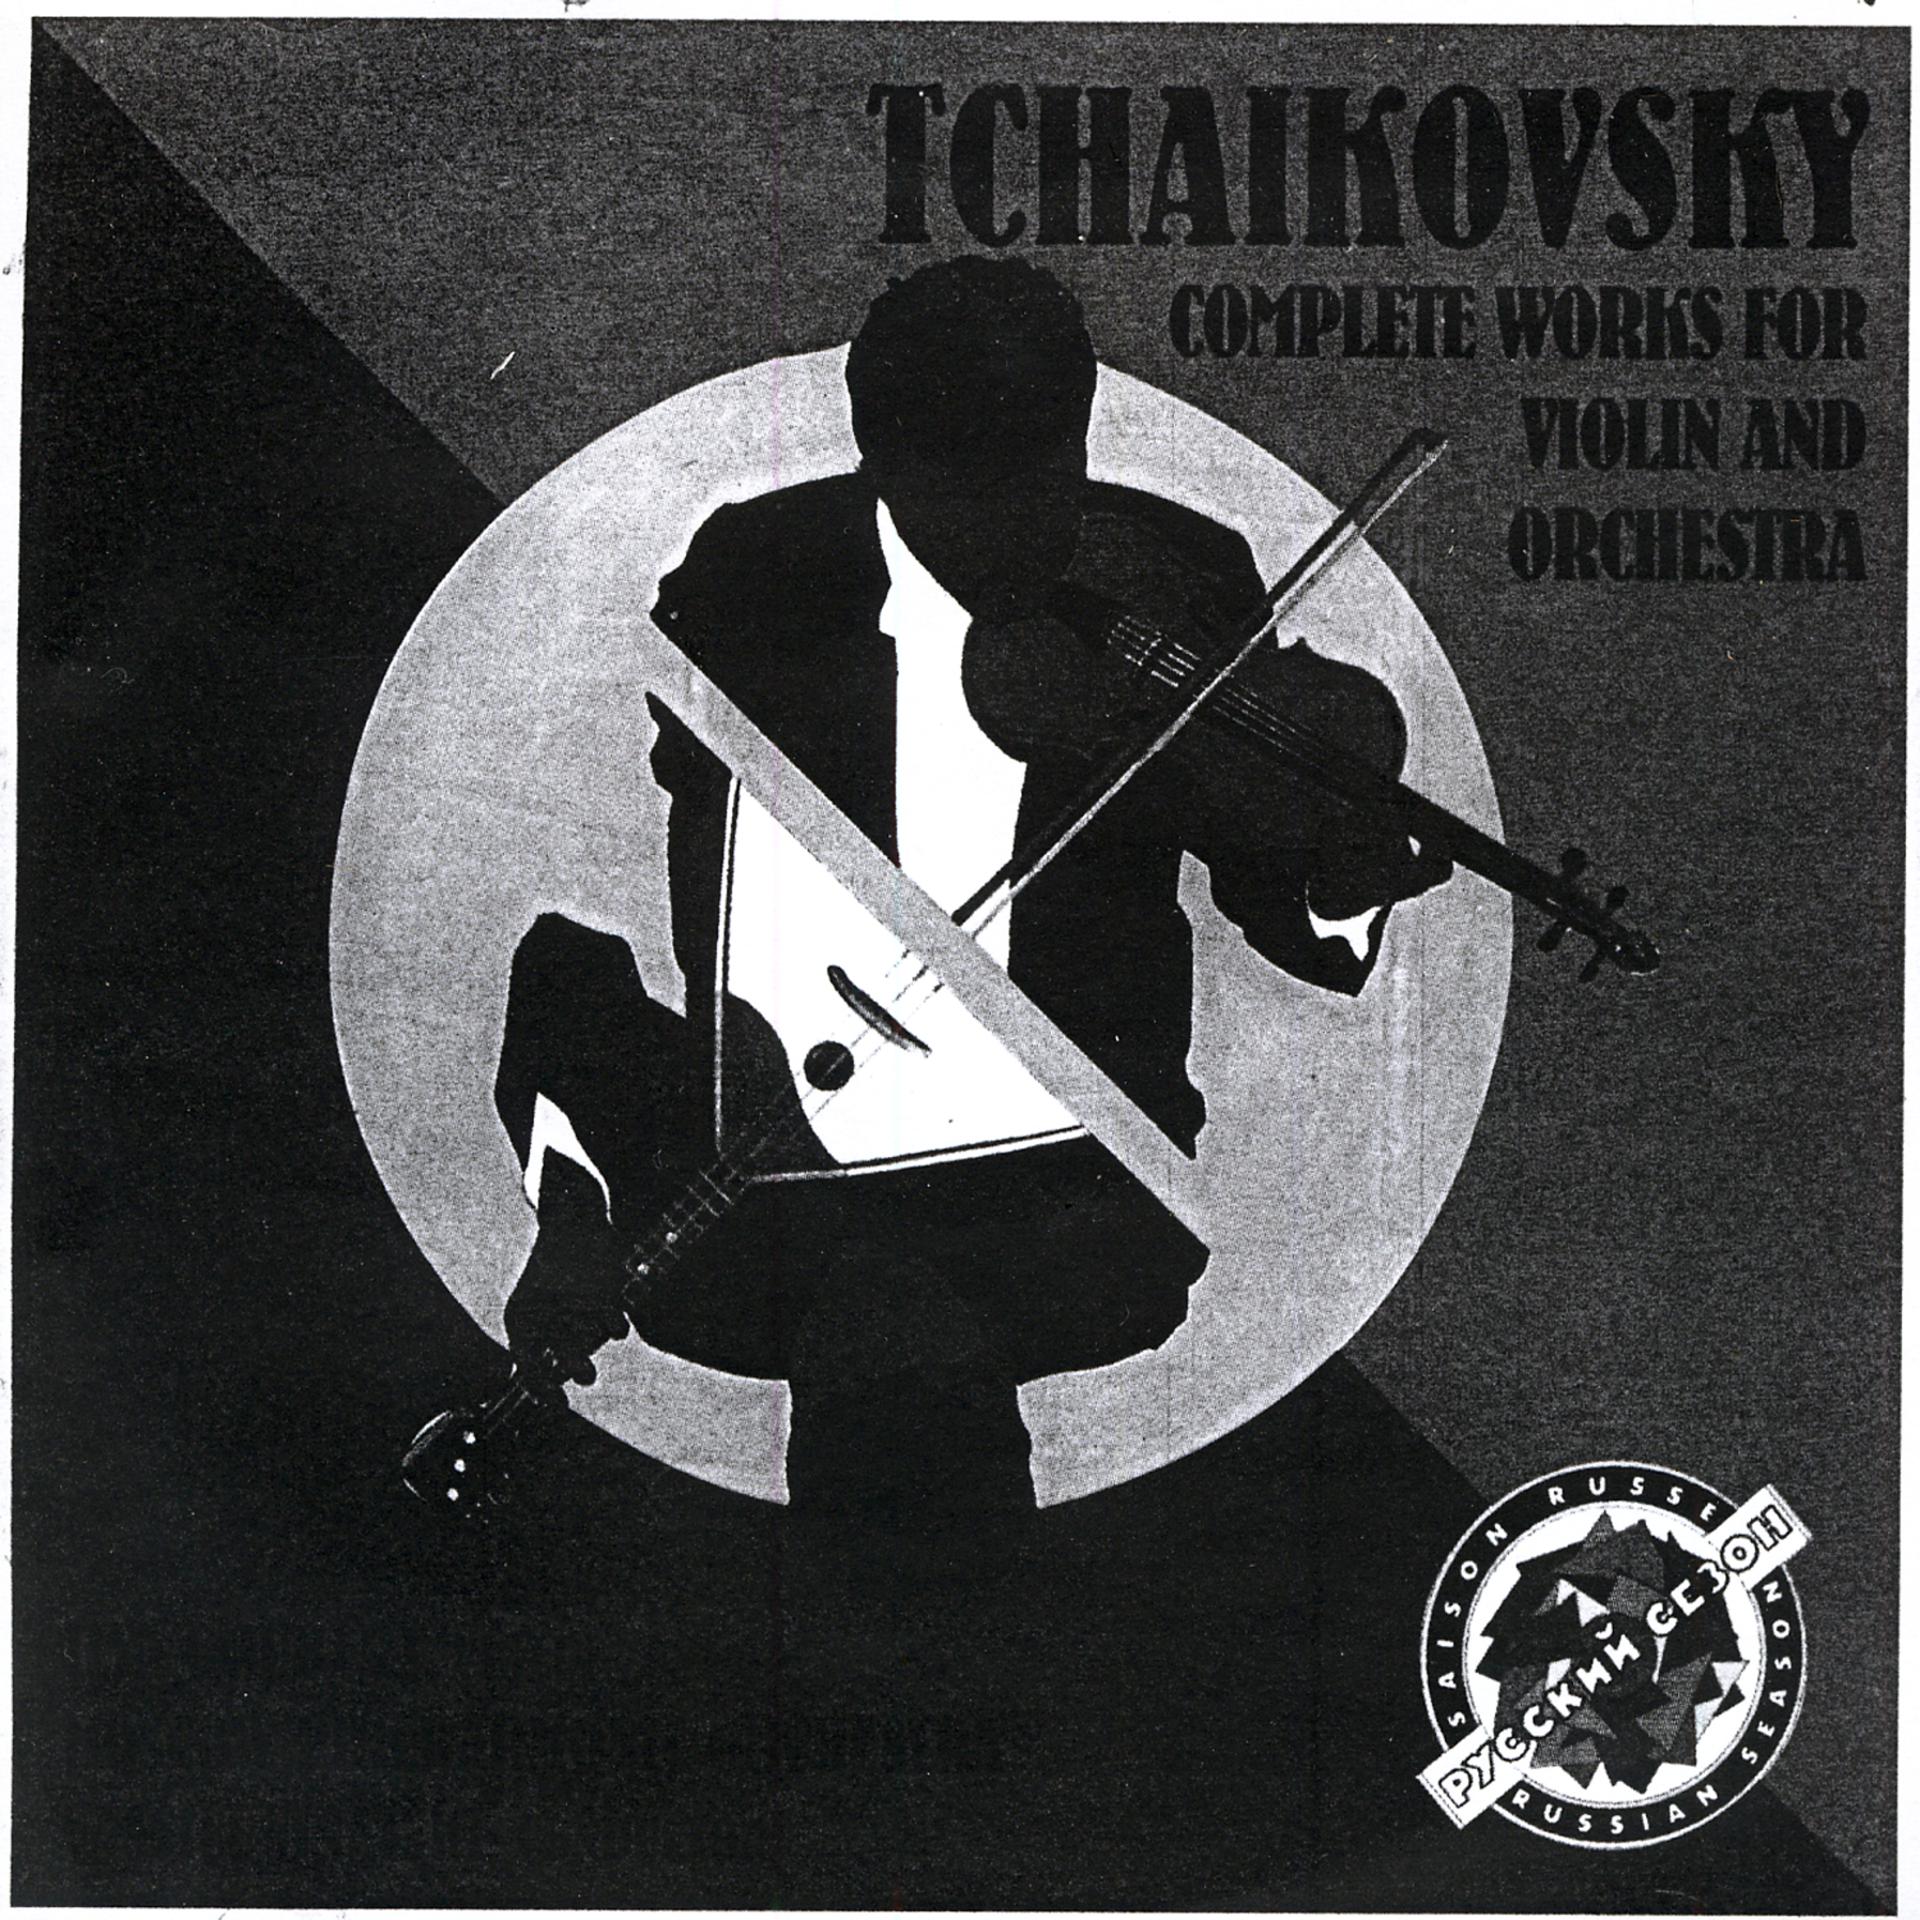 Постер альбома Tchaikovsky: Complete Works For Violin And Orchestra.